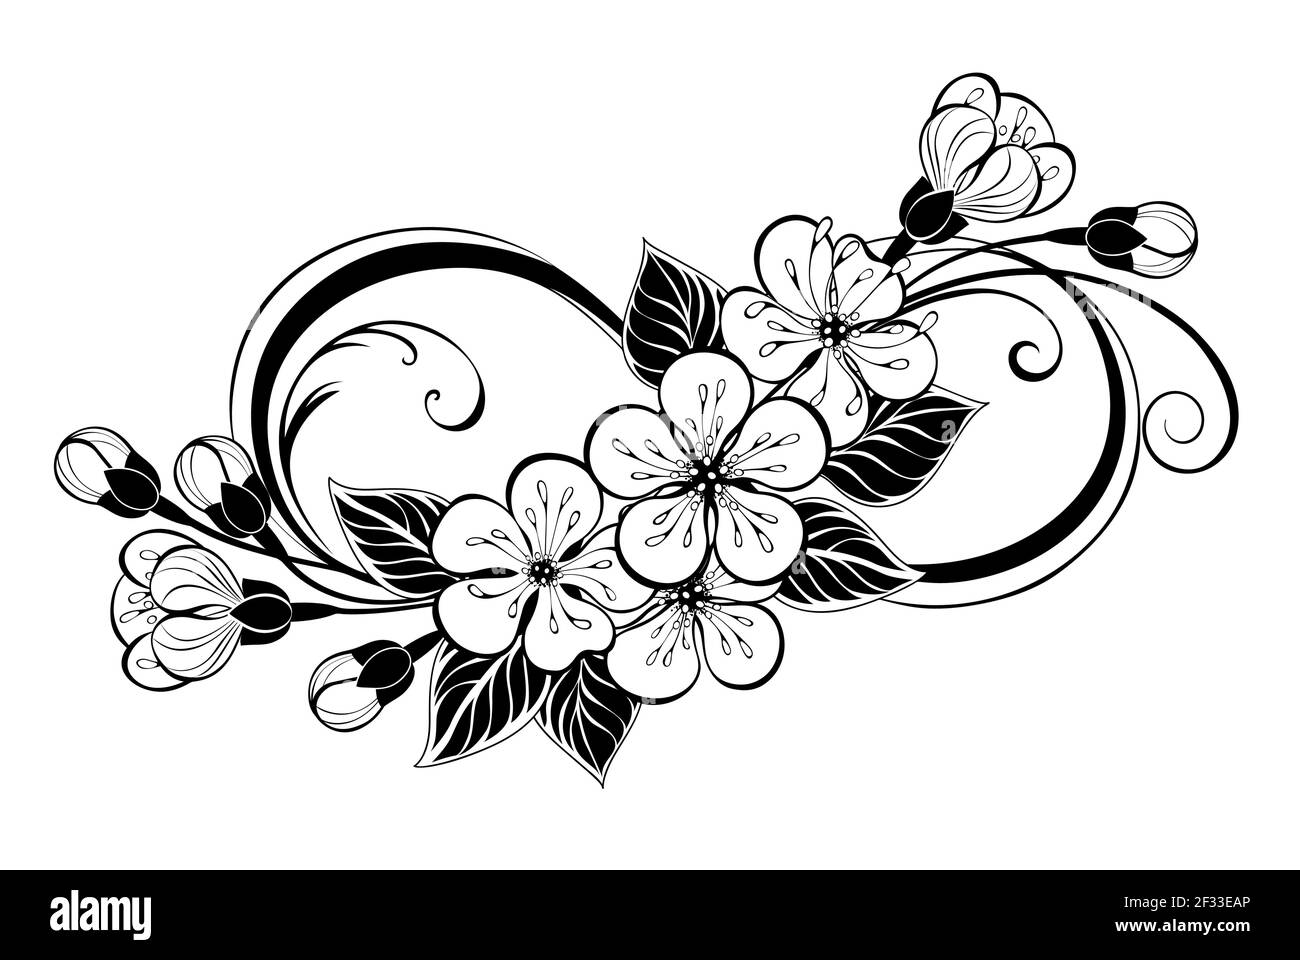 Silhouette symbol of infinity, decorated with outline, artistically drawn, contour, graceful sakura flowers and leaves on white background. Coloring. Stock Vector